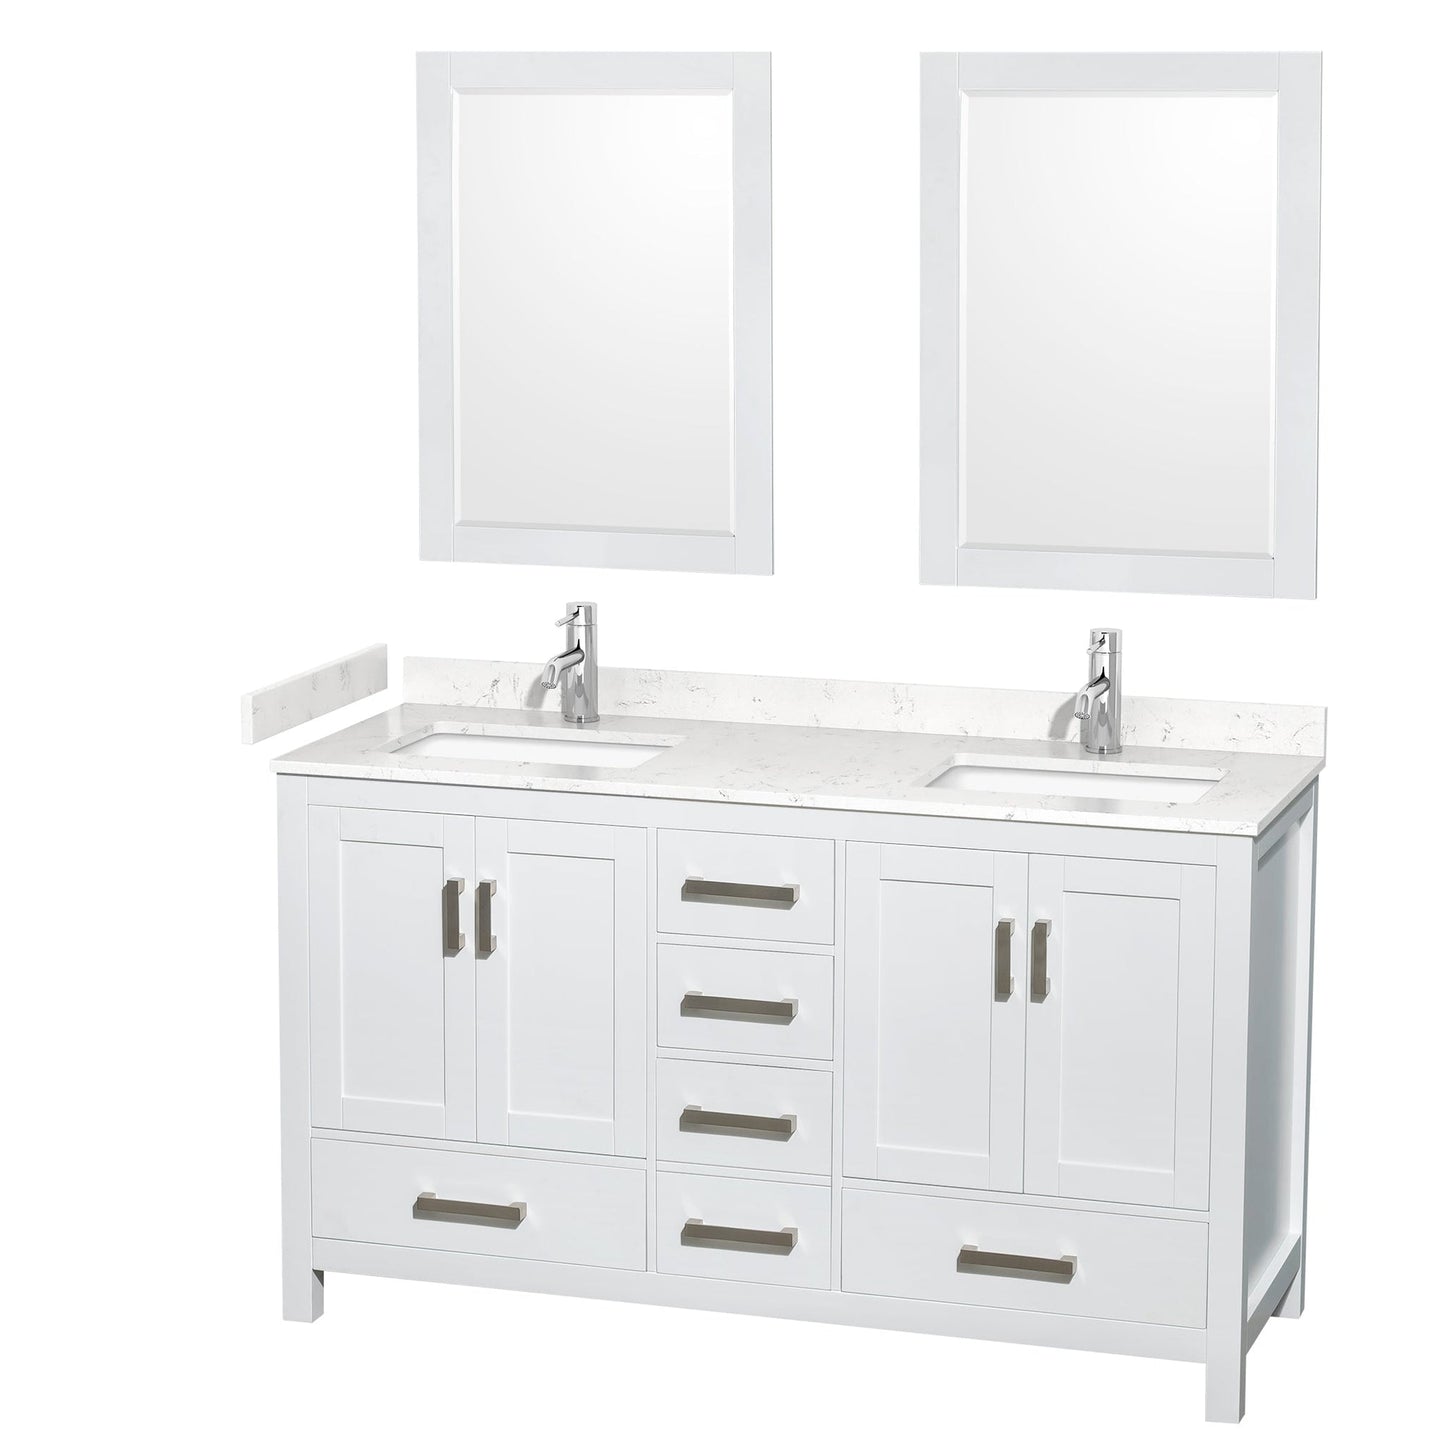 Wyndham Collection Sheffield 60" Double Bathroom Vanity in White, Carrara Cultured Marble Countertop, Undermount Square Sinks, 24" Mirror